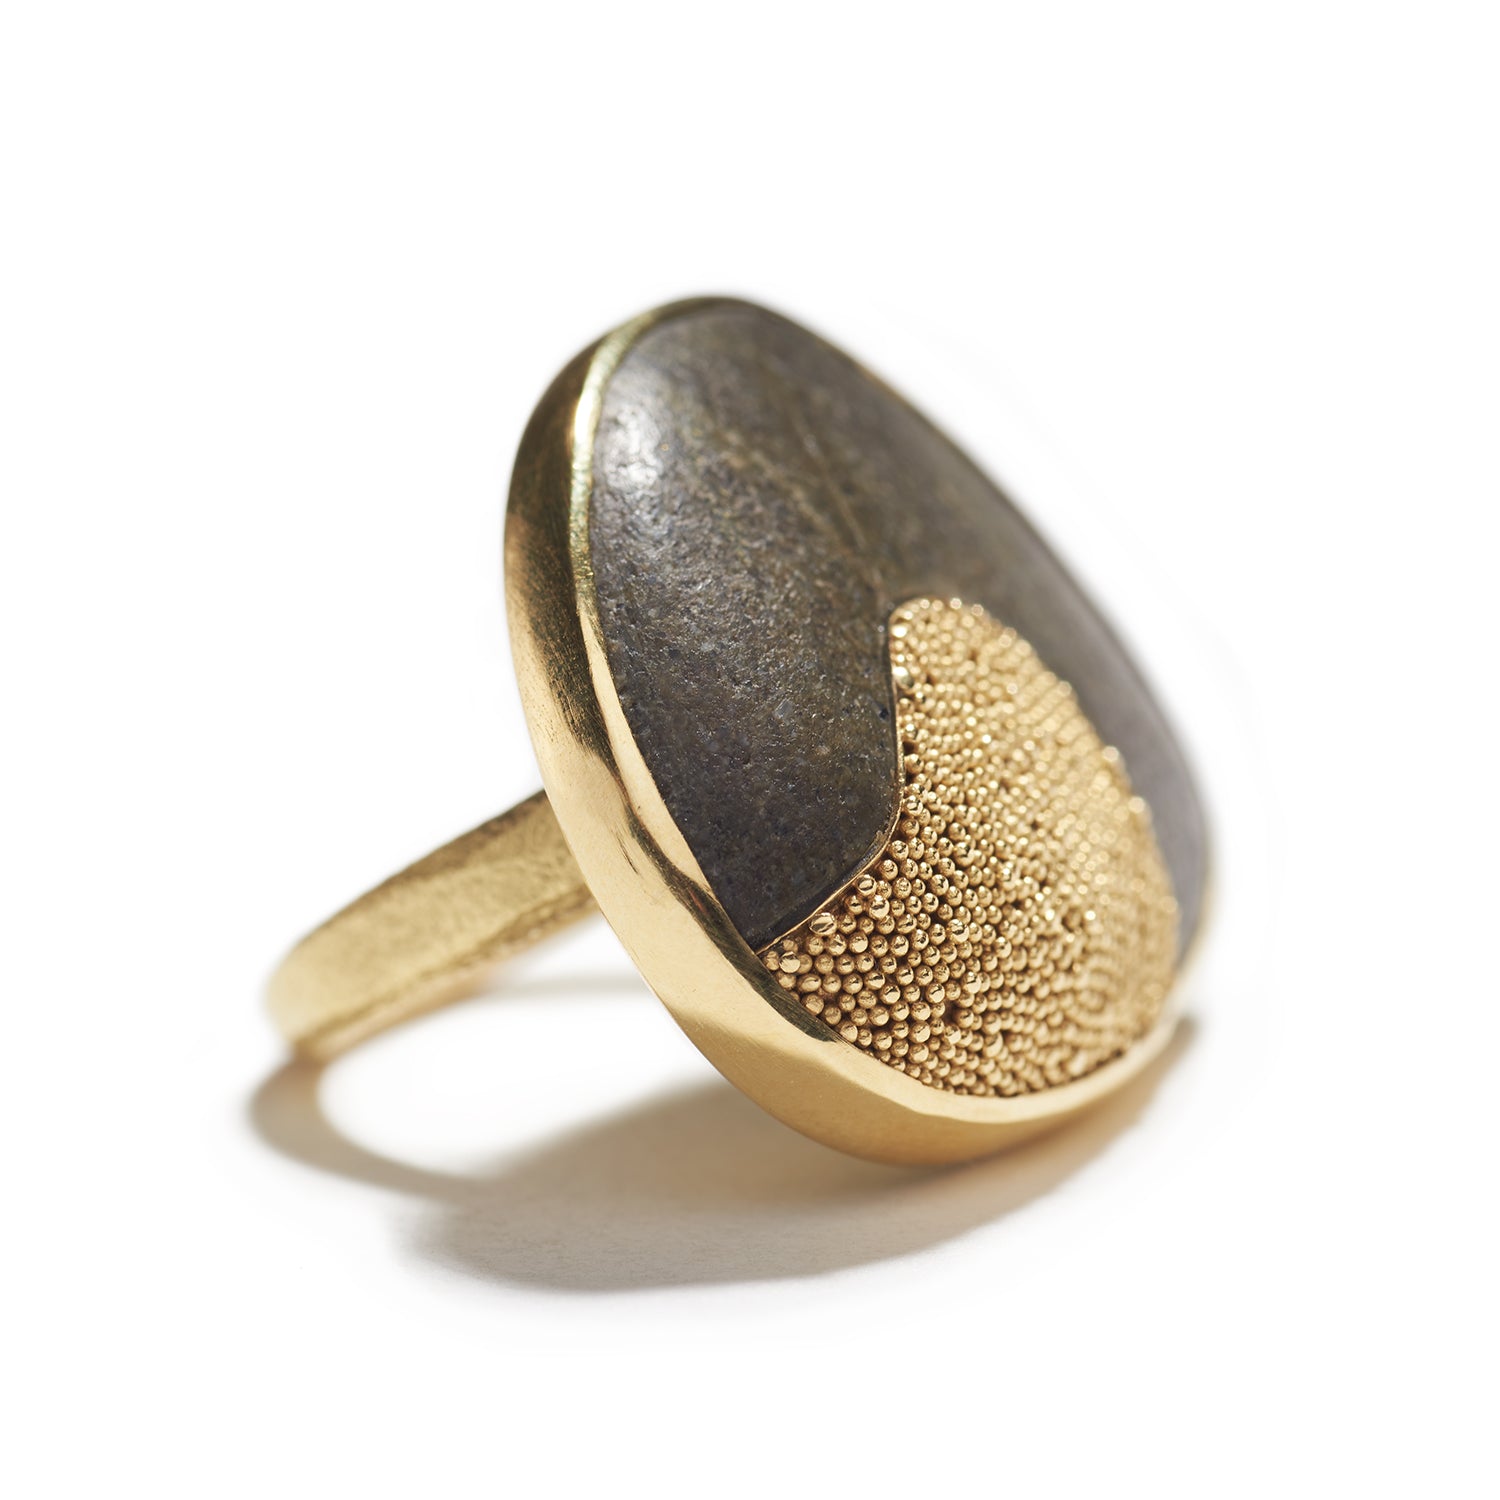 Beach Pebble Inlaid with Gold Ring